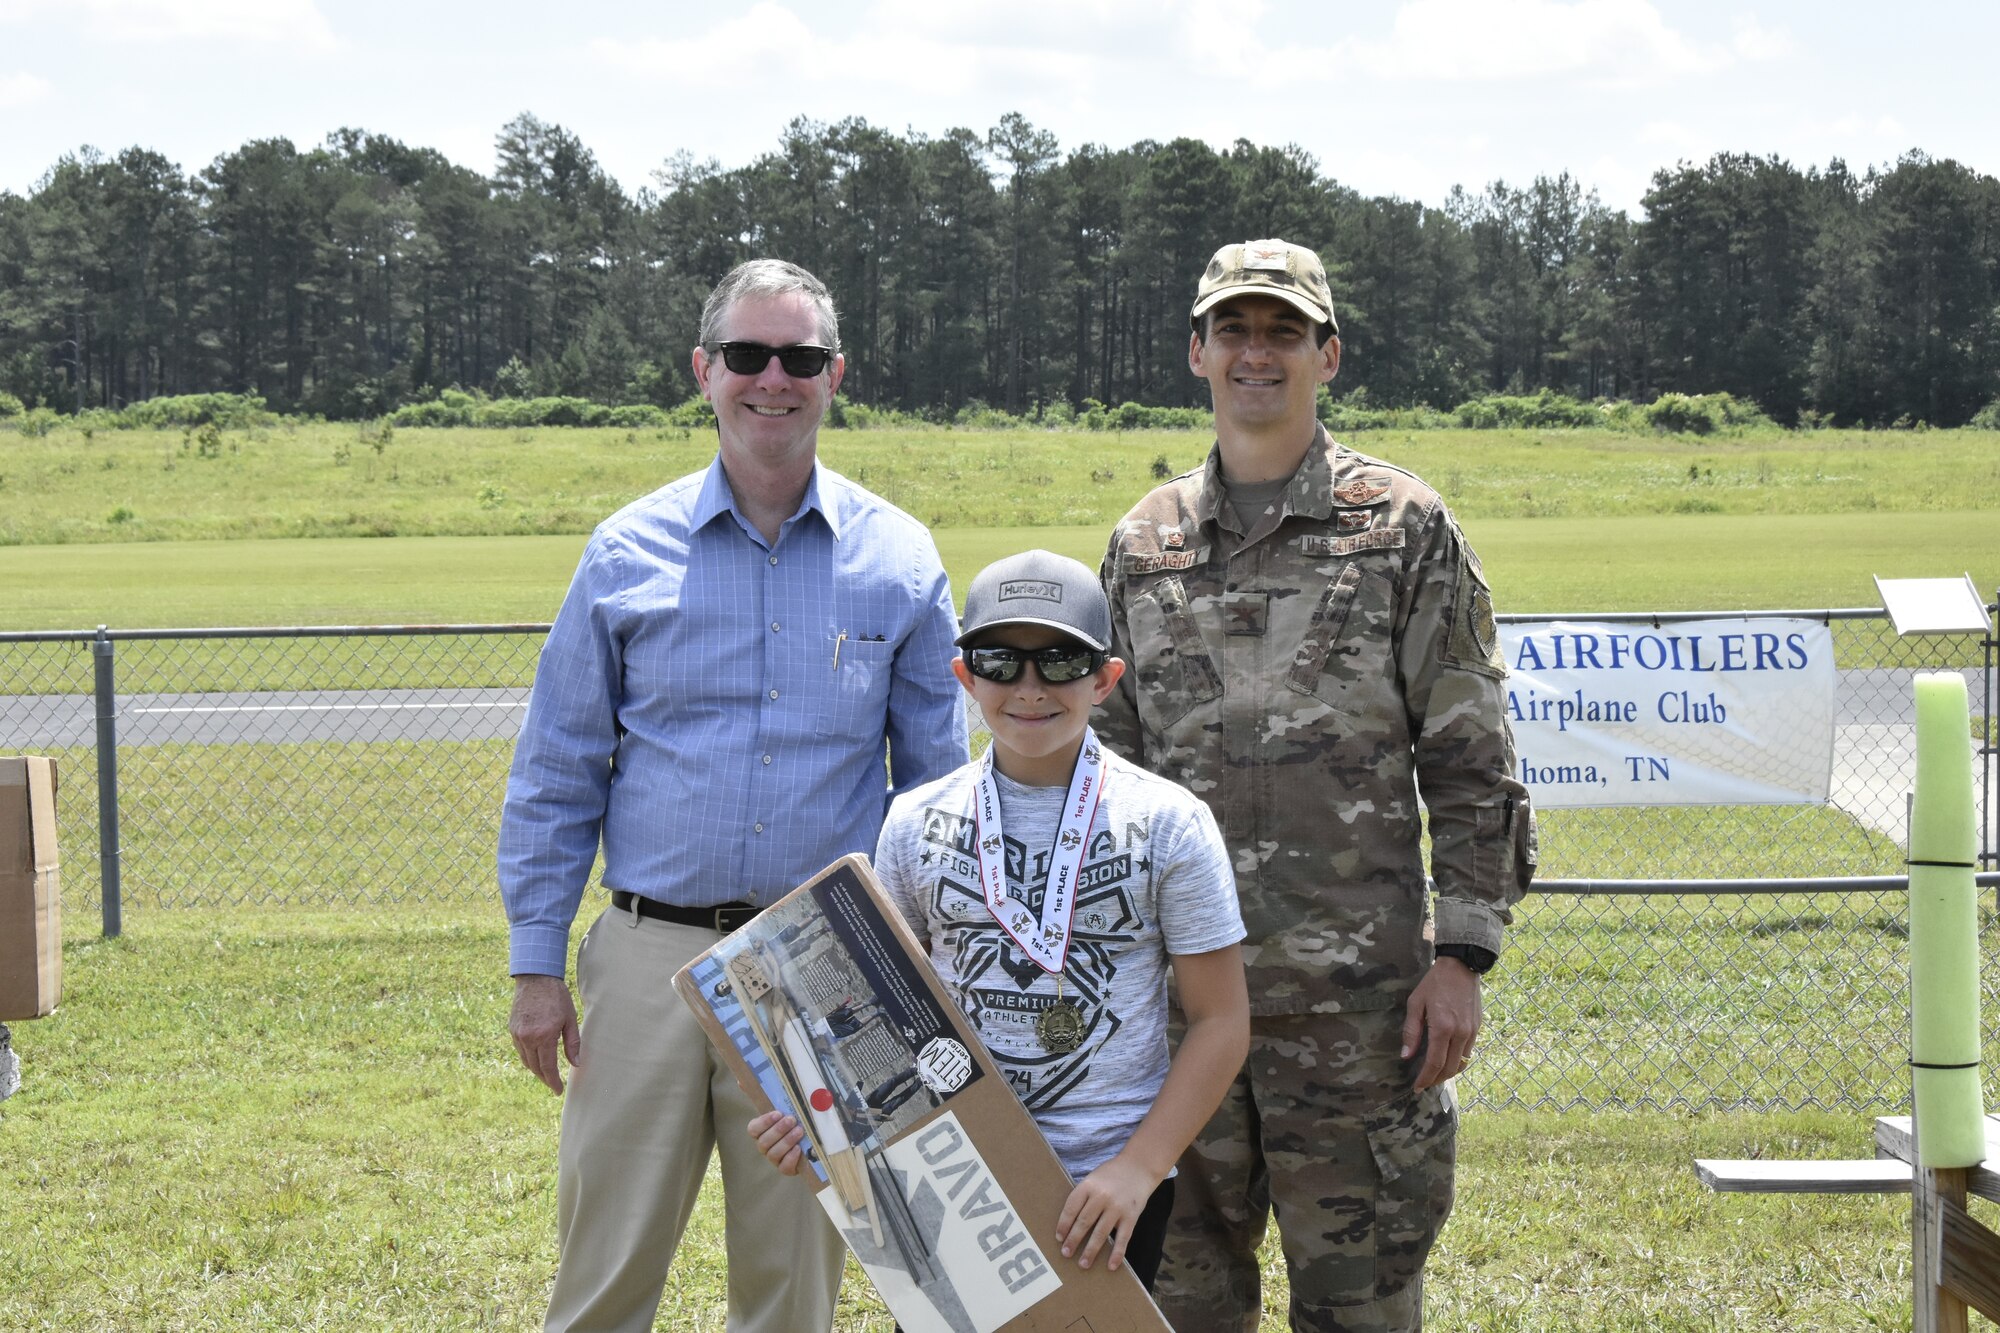 Bryce Spencer, center, was a first-place winner in the Coffee Airfoilers Model RC Club June 26, 2021, airplane toss competition hosted by the club to coincide with the Arnold Engineering Development Complex 70th anniversary. Also pictured are AEDC Commander Col. Jeffrey Geraghty, right, and AEDC Vice Director Jason Coker. Youth participating in the event were tasked with assembling small balsa wood airplanes, with prizes going to those whose planes flew the furthest from the launch line. The event was intended to promote science, technology, engineering and mathematics, or STEM, interest among students taking part. (U.S. Air Force photo by Bradley Hicks)